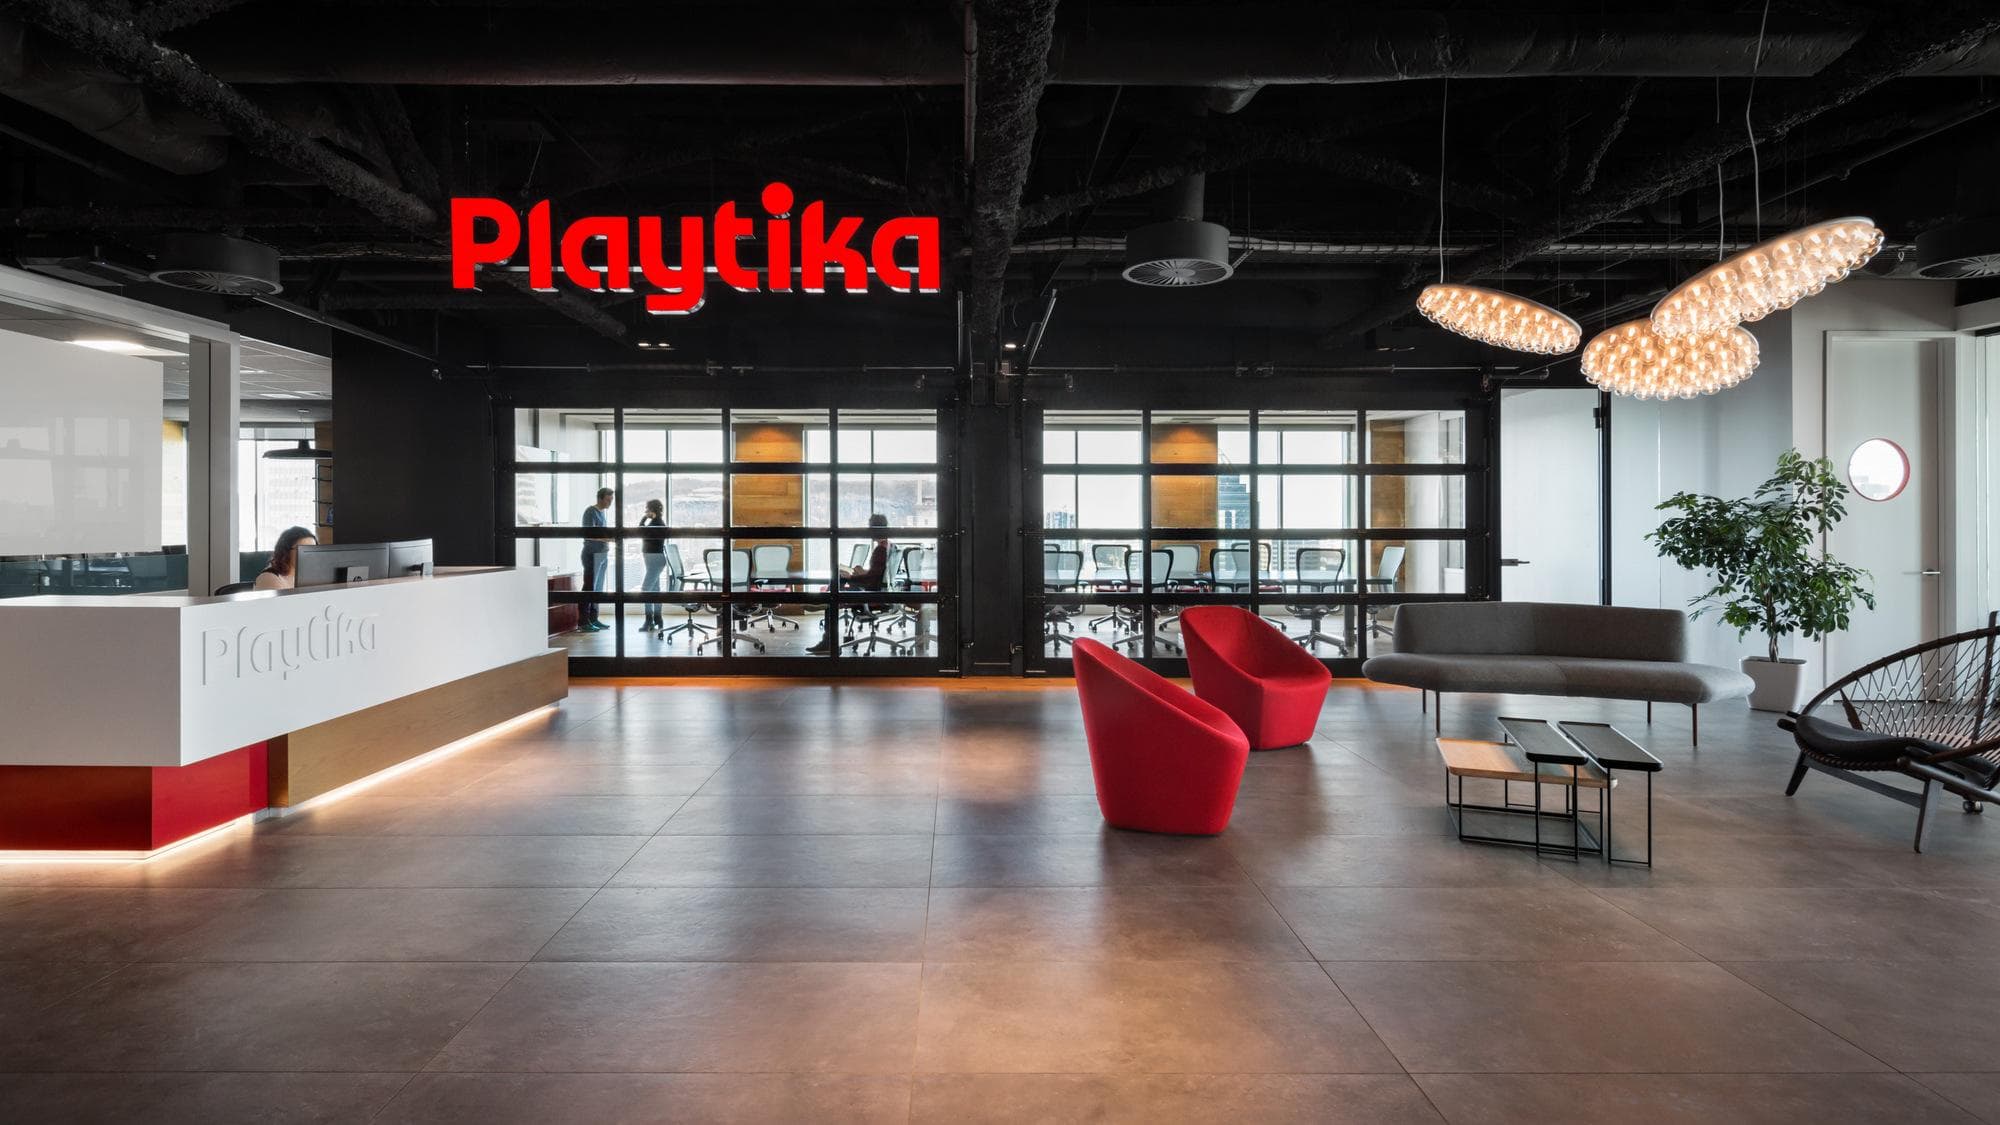 A Major Stake in Playtika Will Be Acquired for $8.5 Billion